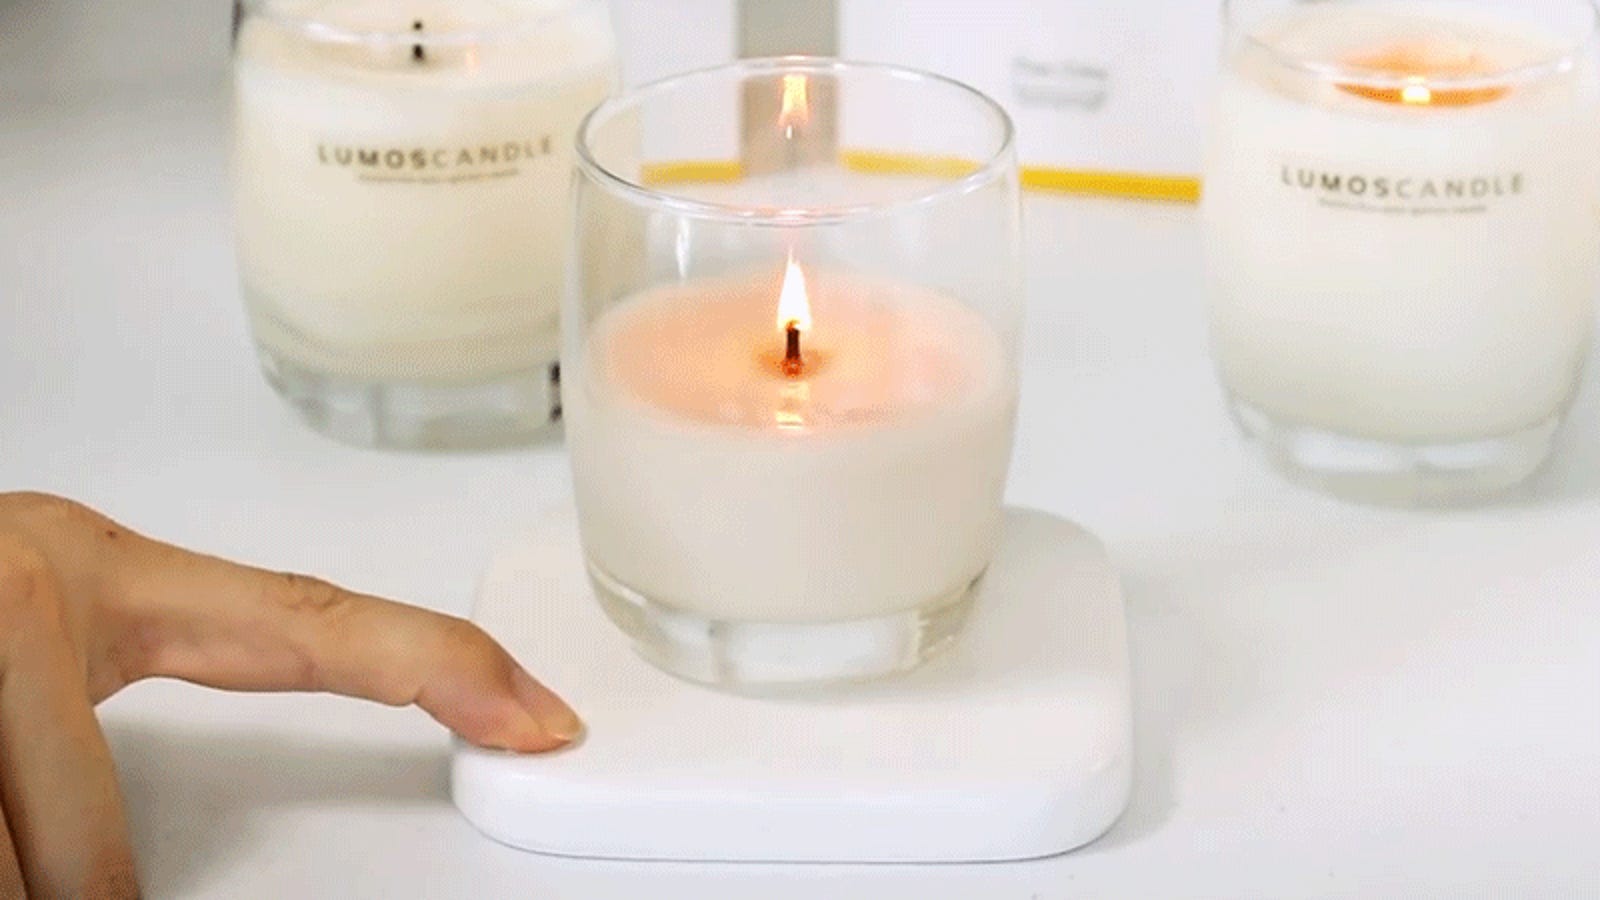 photo of Candles That Light Themselves At the Push of a Button Are Perfect Overkill image